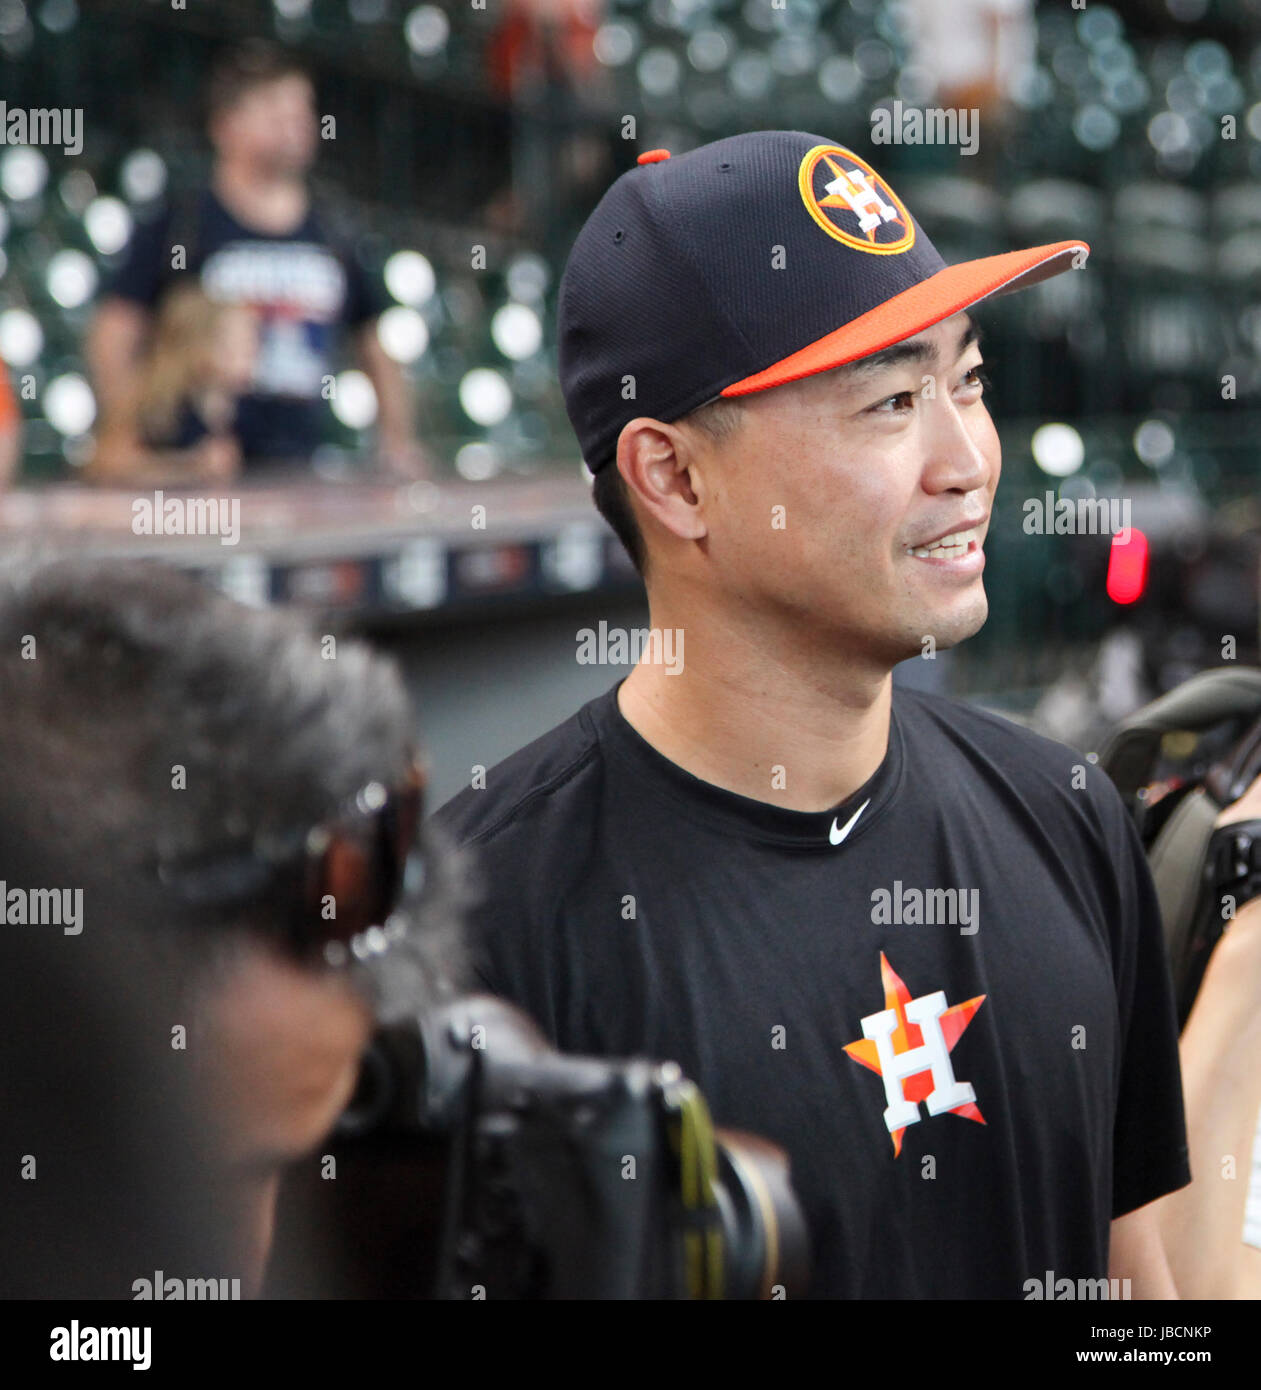 Houston, TX, USA. 10th June, 2017. Houston Astros left fielder Norichika Aoki (3) speaks with the media prior to the start of the MLB game between the Los Angeles Angels and the Houston Astros at Minute Maid Park in Houston, TX. John Glaser/CSM/Alamy Live News Stock Photo